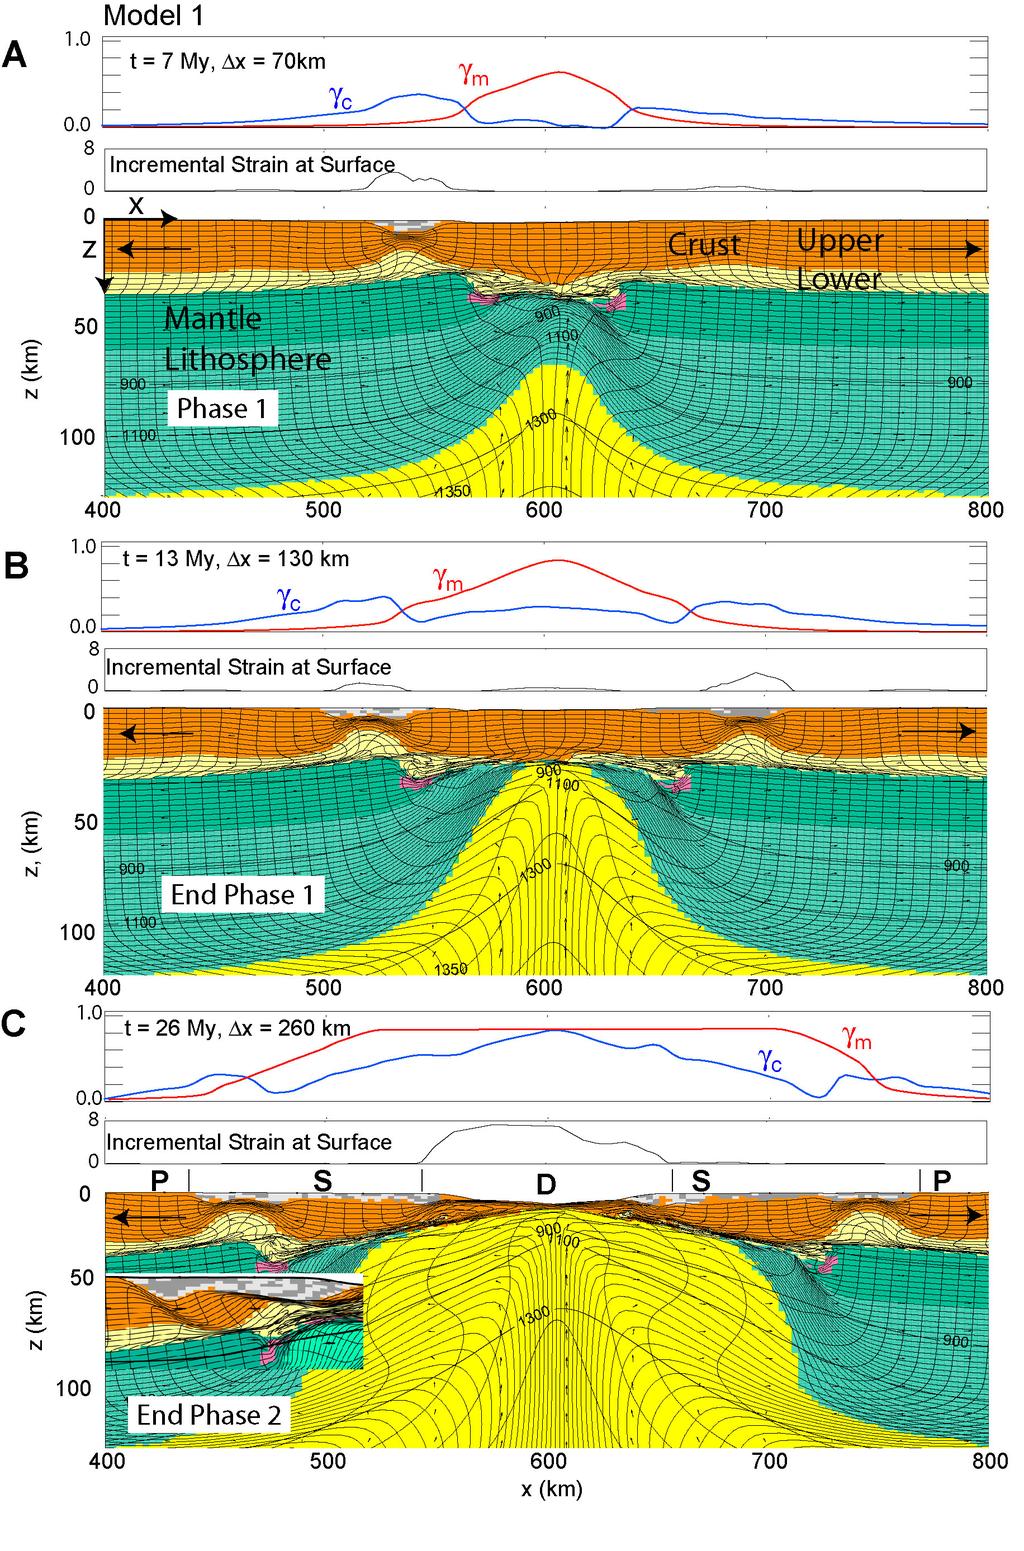 DR2008039 Huismans and Beaumont 7 Supplementary numerical models of lithosphere extension Figure DR5. Model 1. High resolution version of Figure 2.